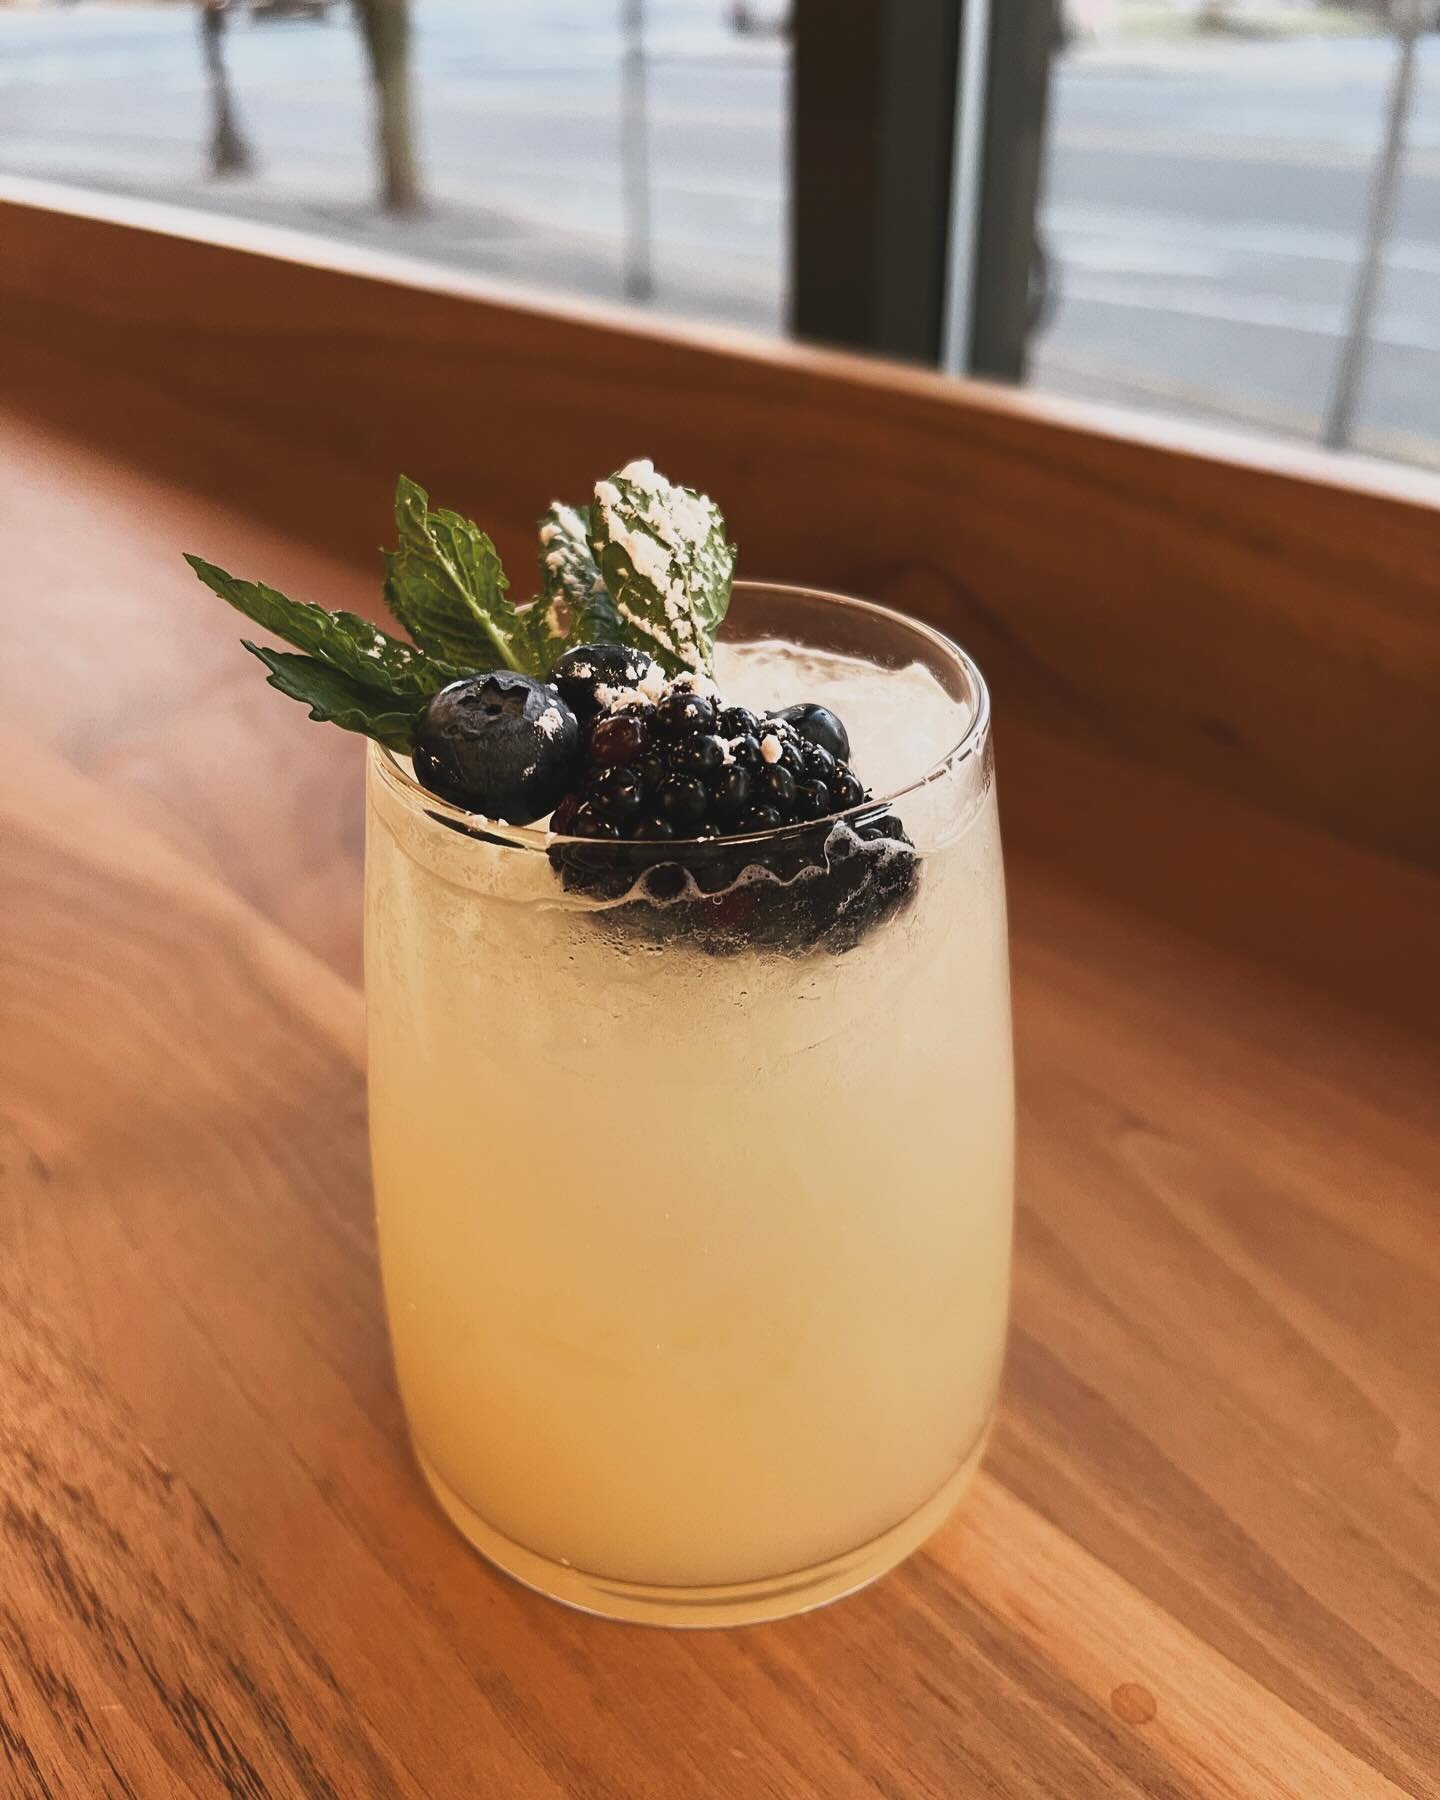 Buy mom a drink for keeping you alive. Open tonight 5pm-9pm!

#orgeatlemonade #spikeit #buymomadrinktoday #happymothersday #mothersdayweekend #goodfood #craftdrinks #nighmoves #moonlighter #dtsouthbend